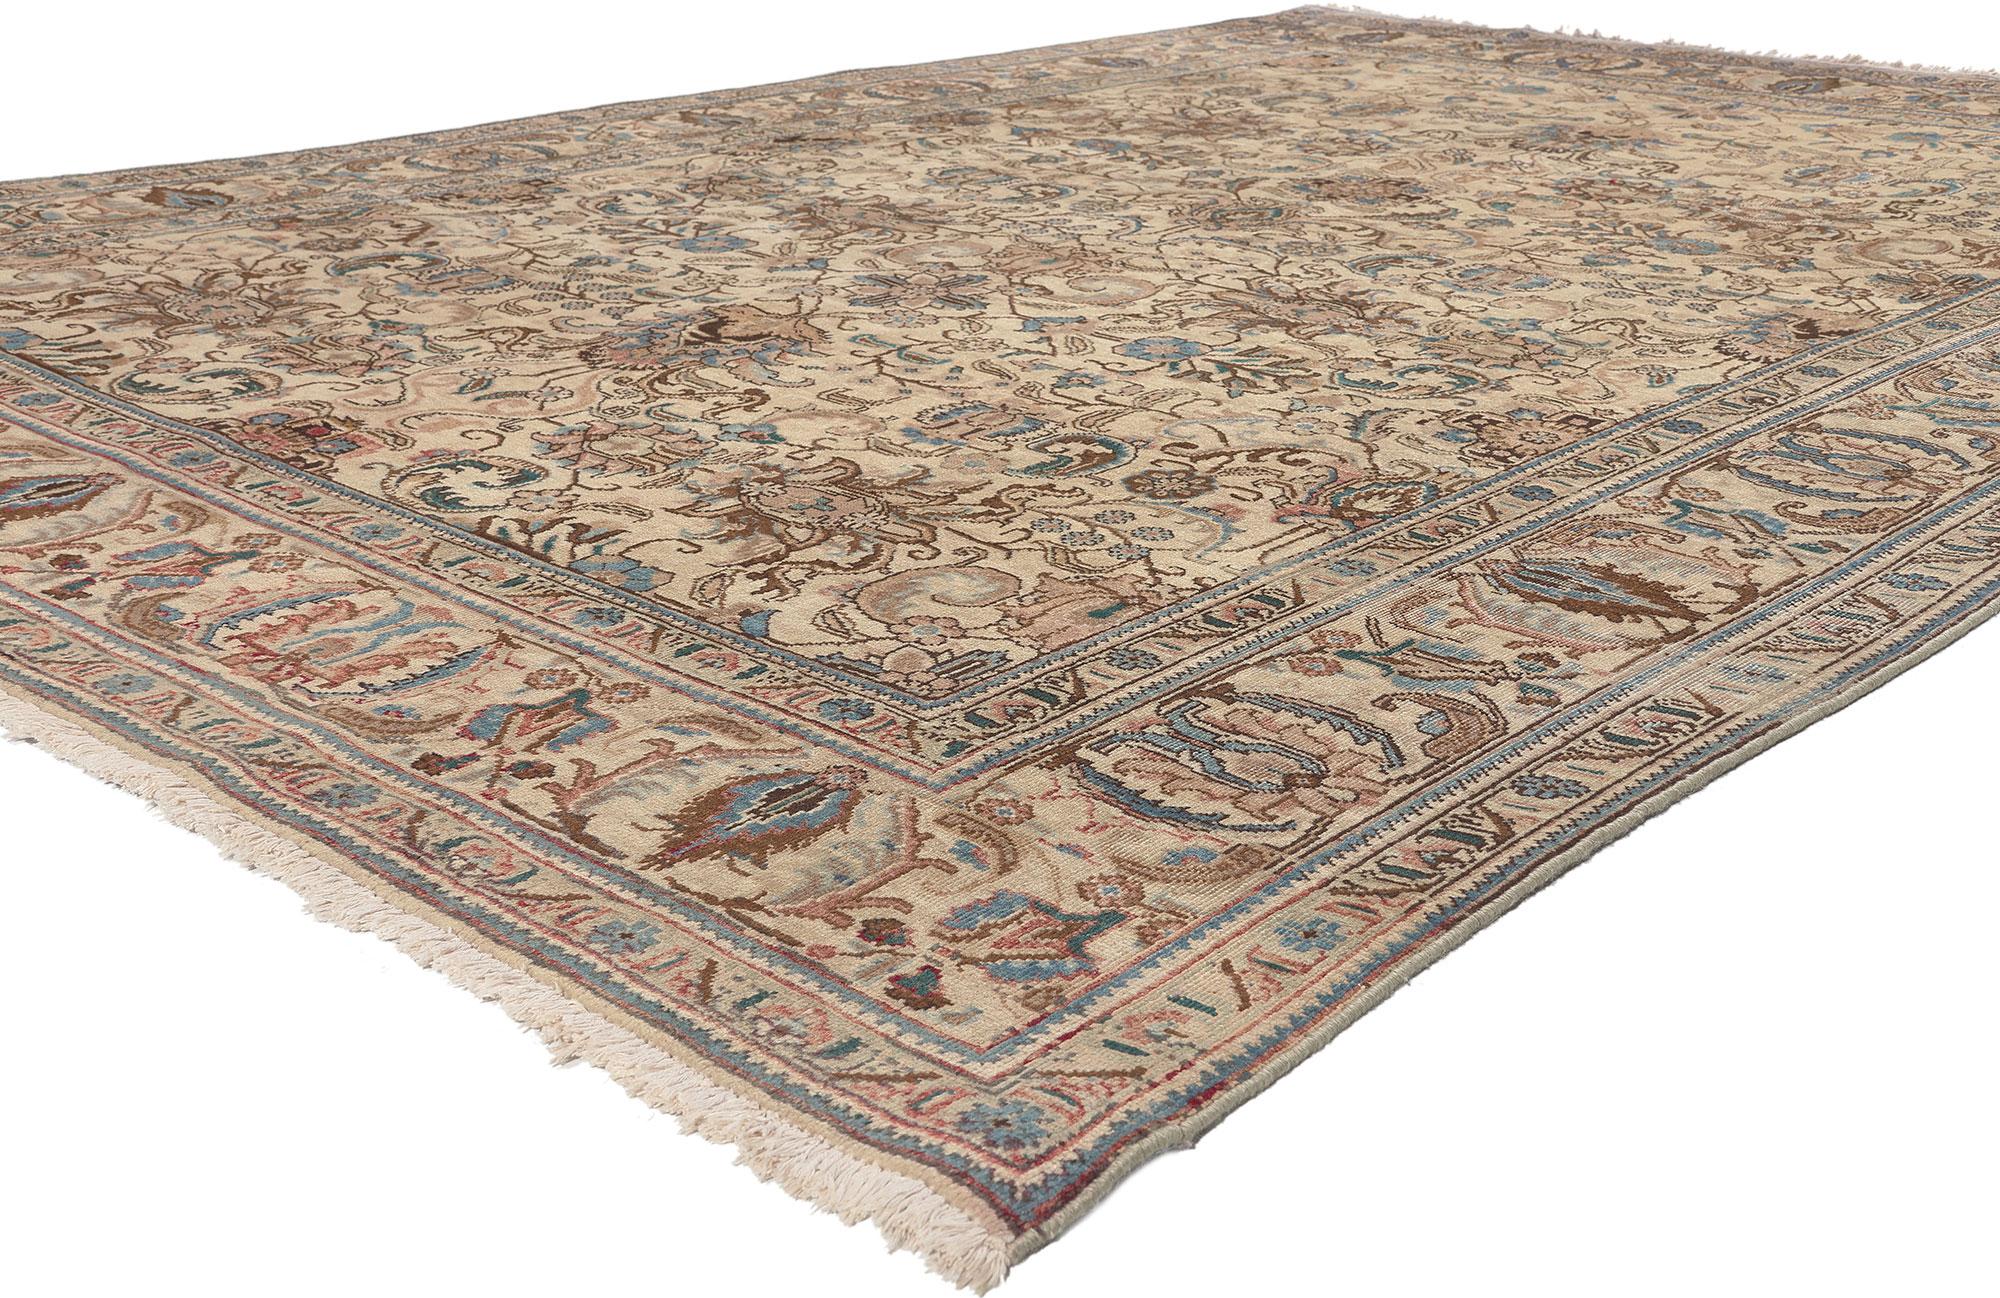 75518 Vintage Persian Tabriz Rug, 07'07 x 10'10. 
Belgian style meets low-key luxury in this vintage Persian Tabriz rug. The decorative floral design and neutral earth-tone colors woven into this piece work together creating inimitable warmth and